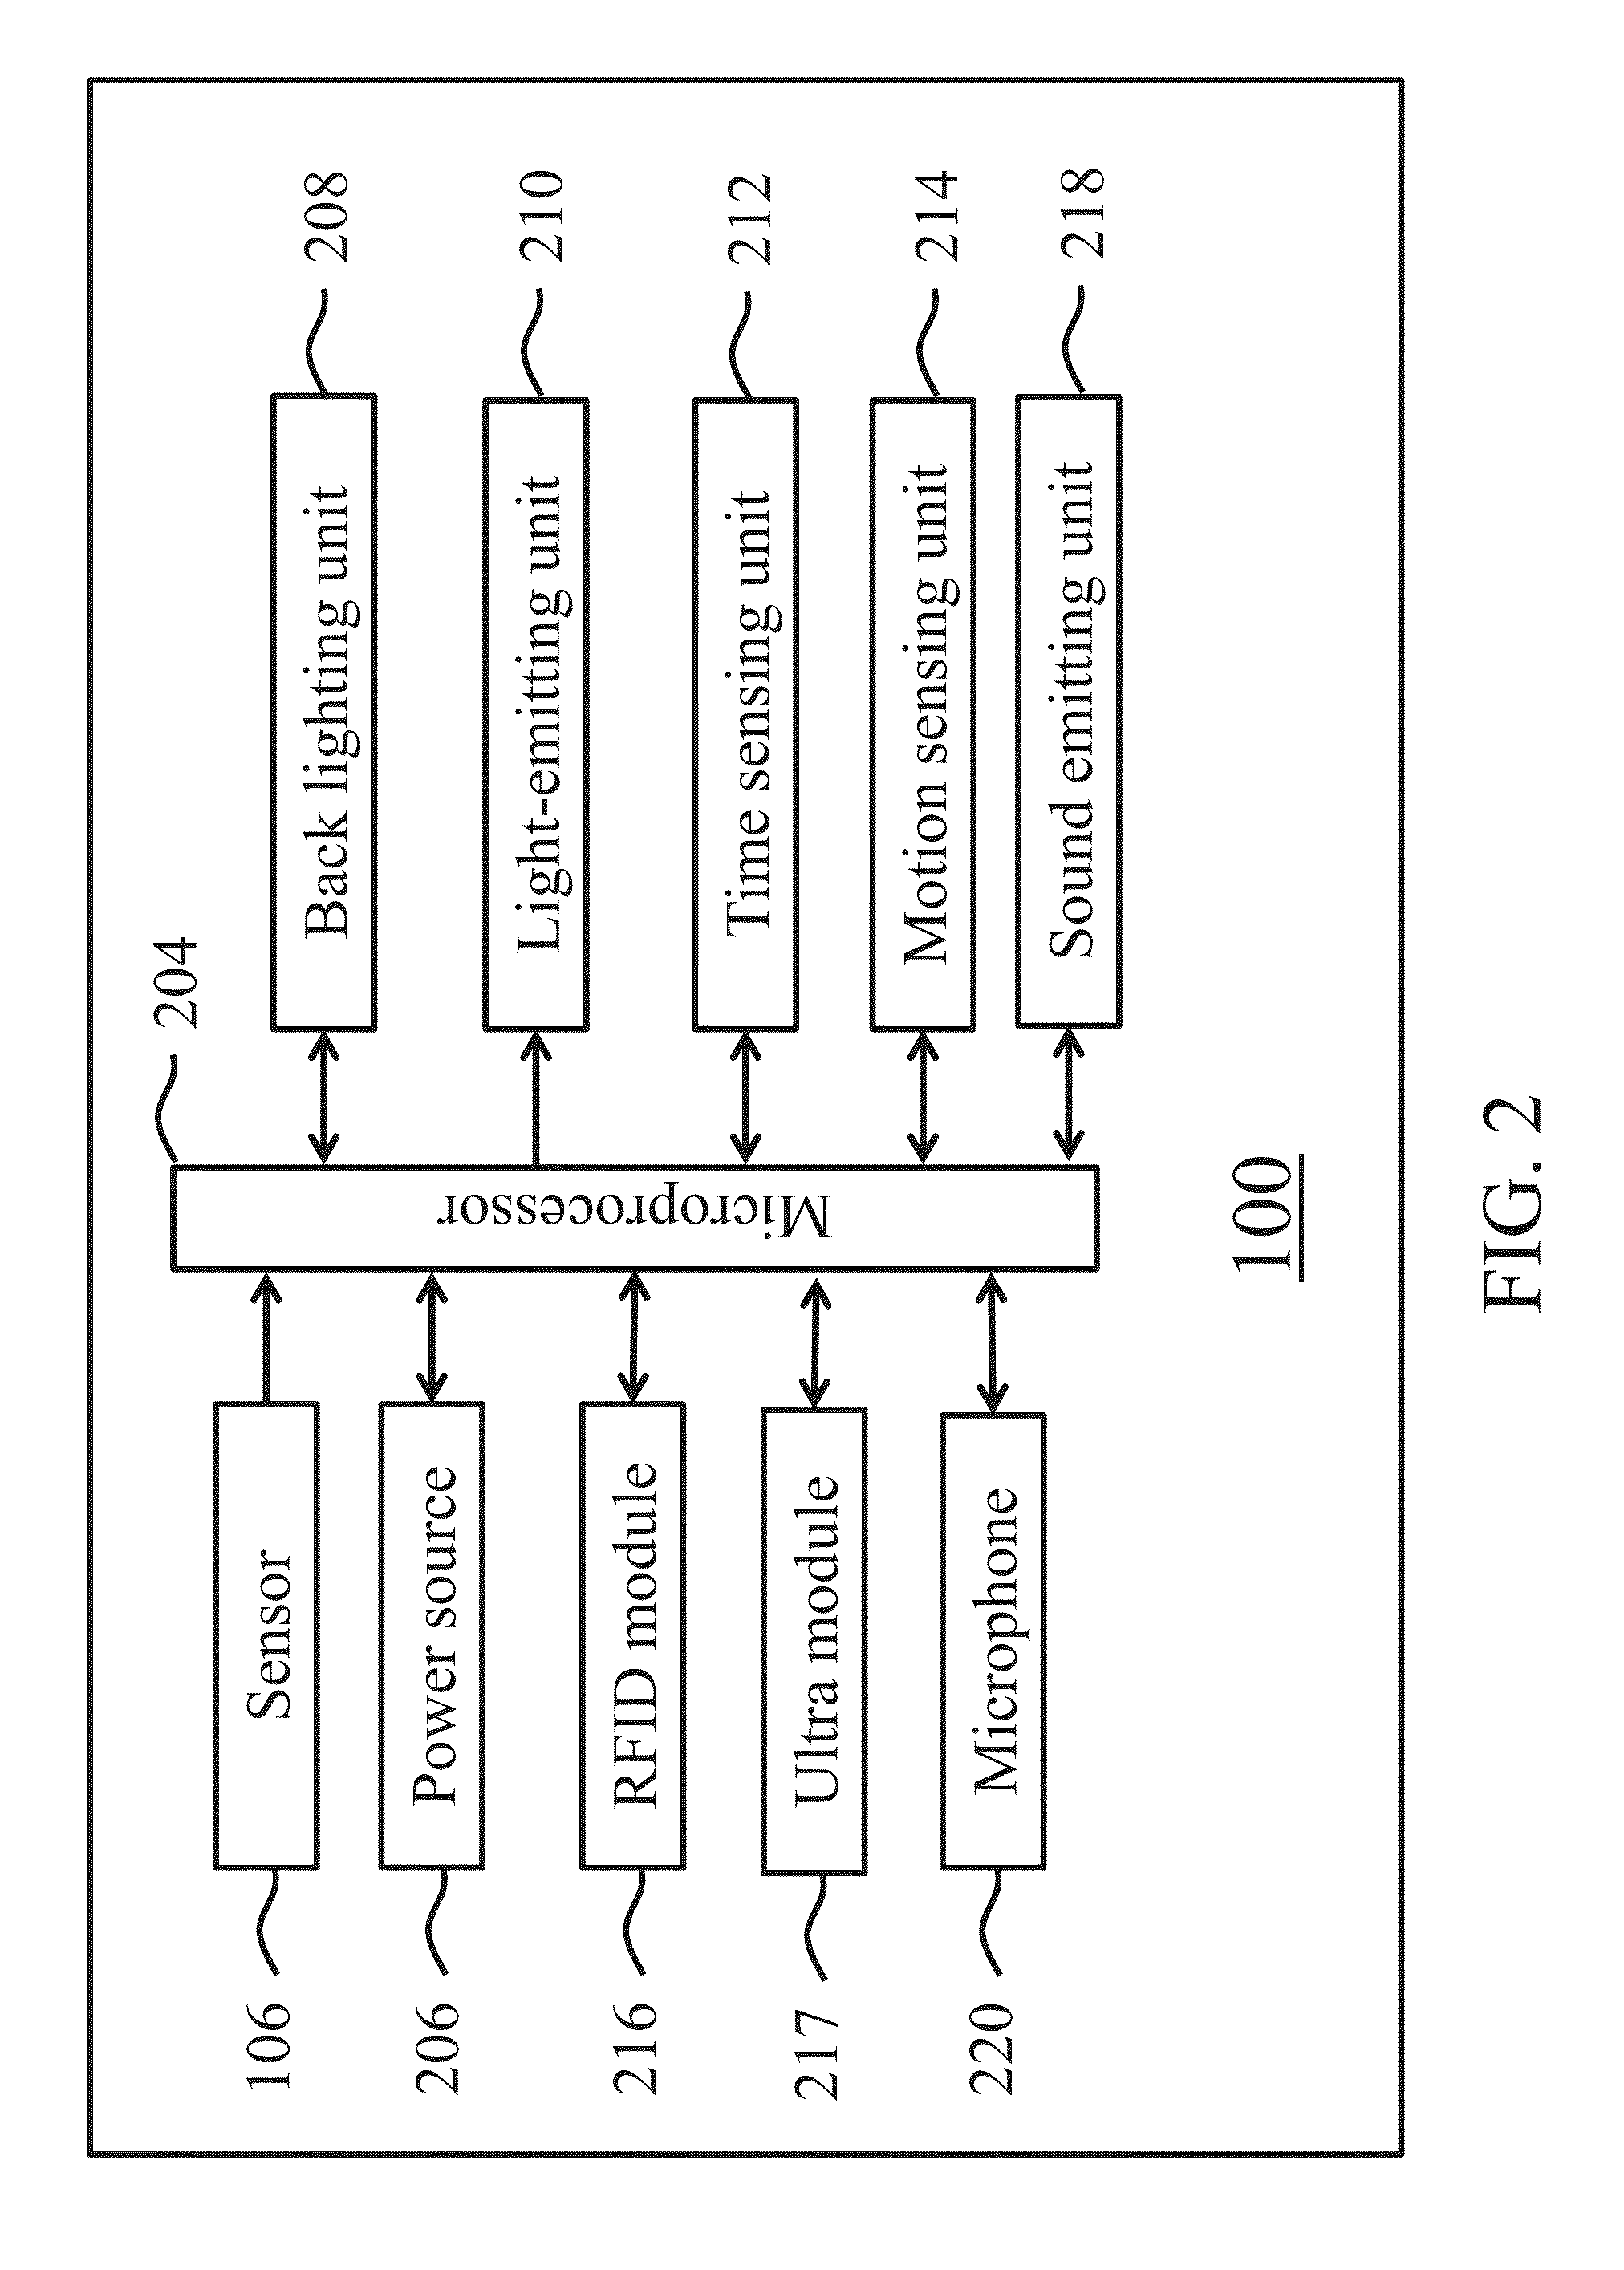 System and method for improving hand hygiene